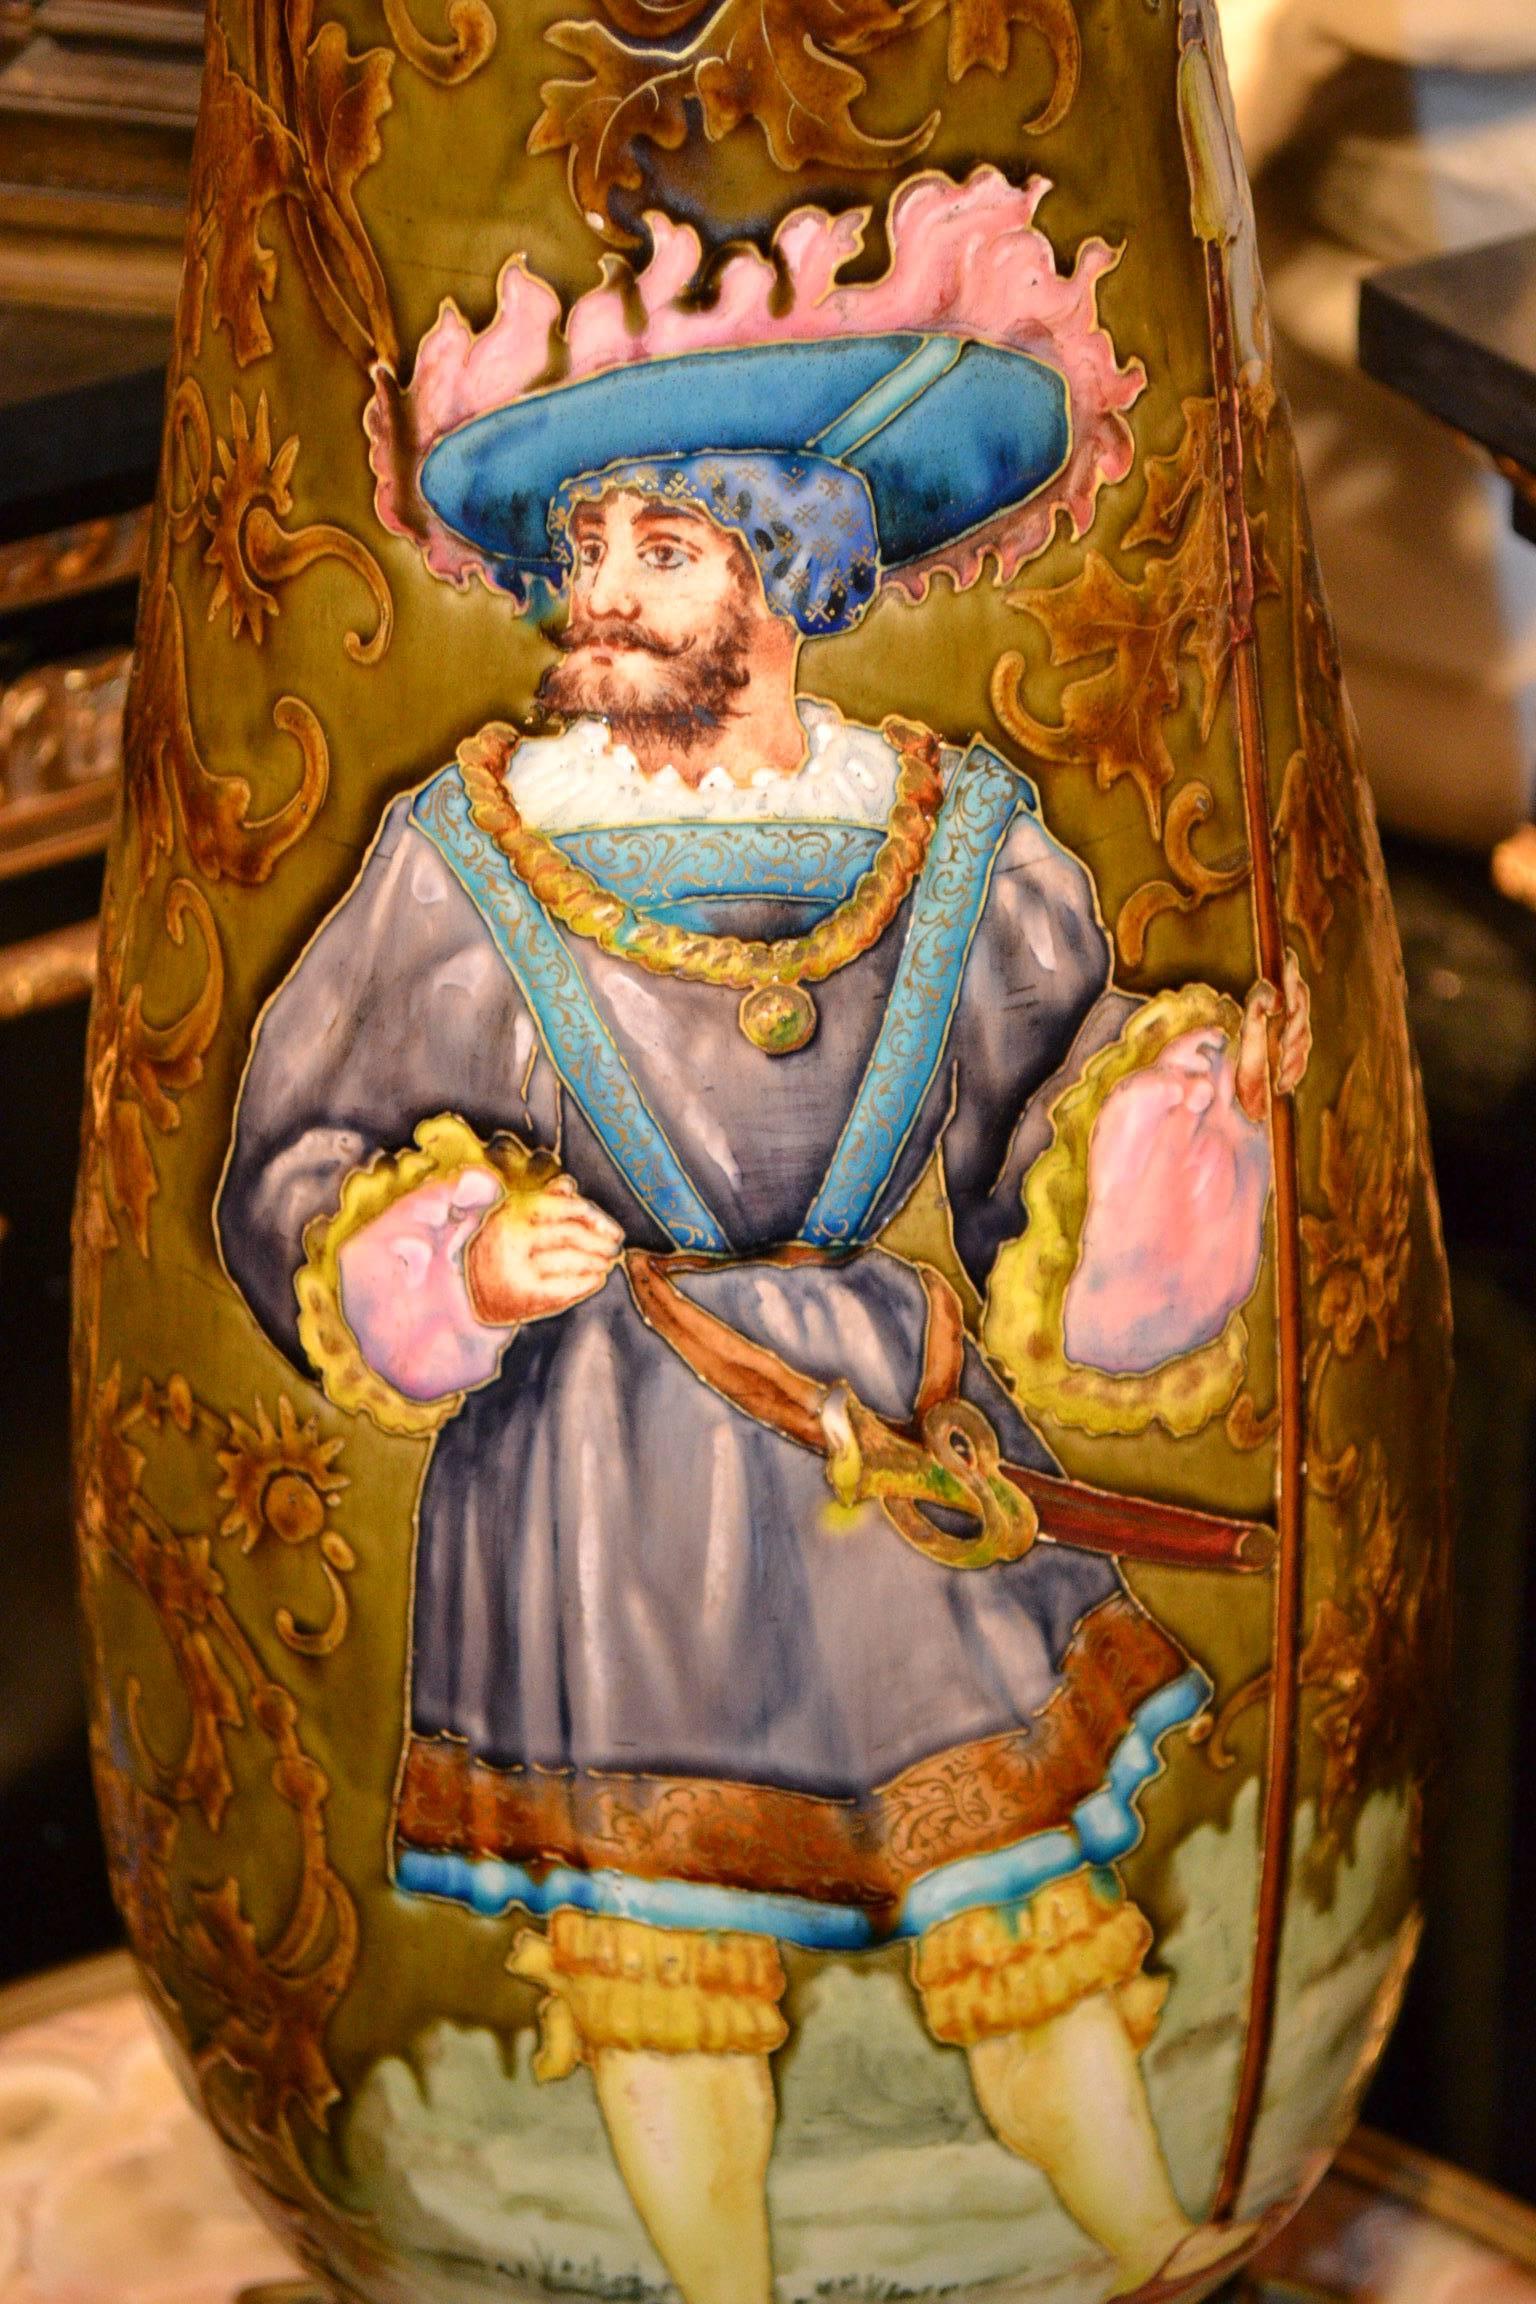 European Large Enameled on Porcelain and Bronze Footed Vase with Standing Chevalier Scene